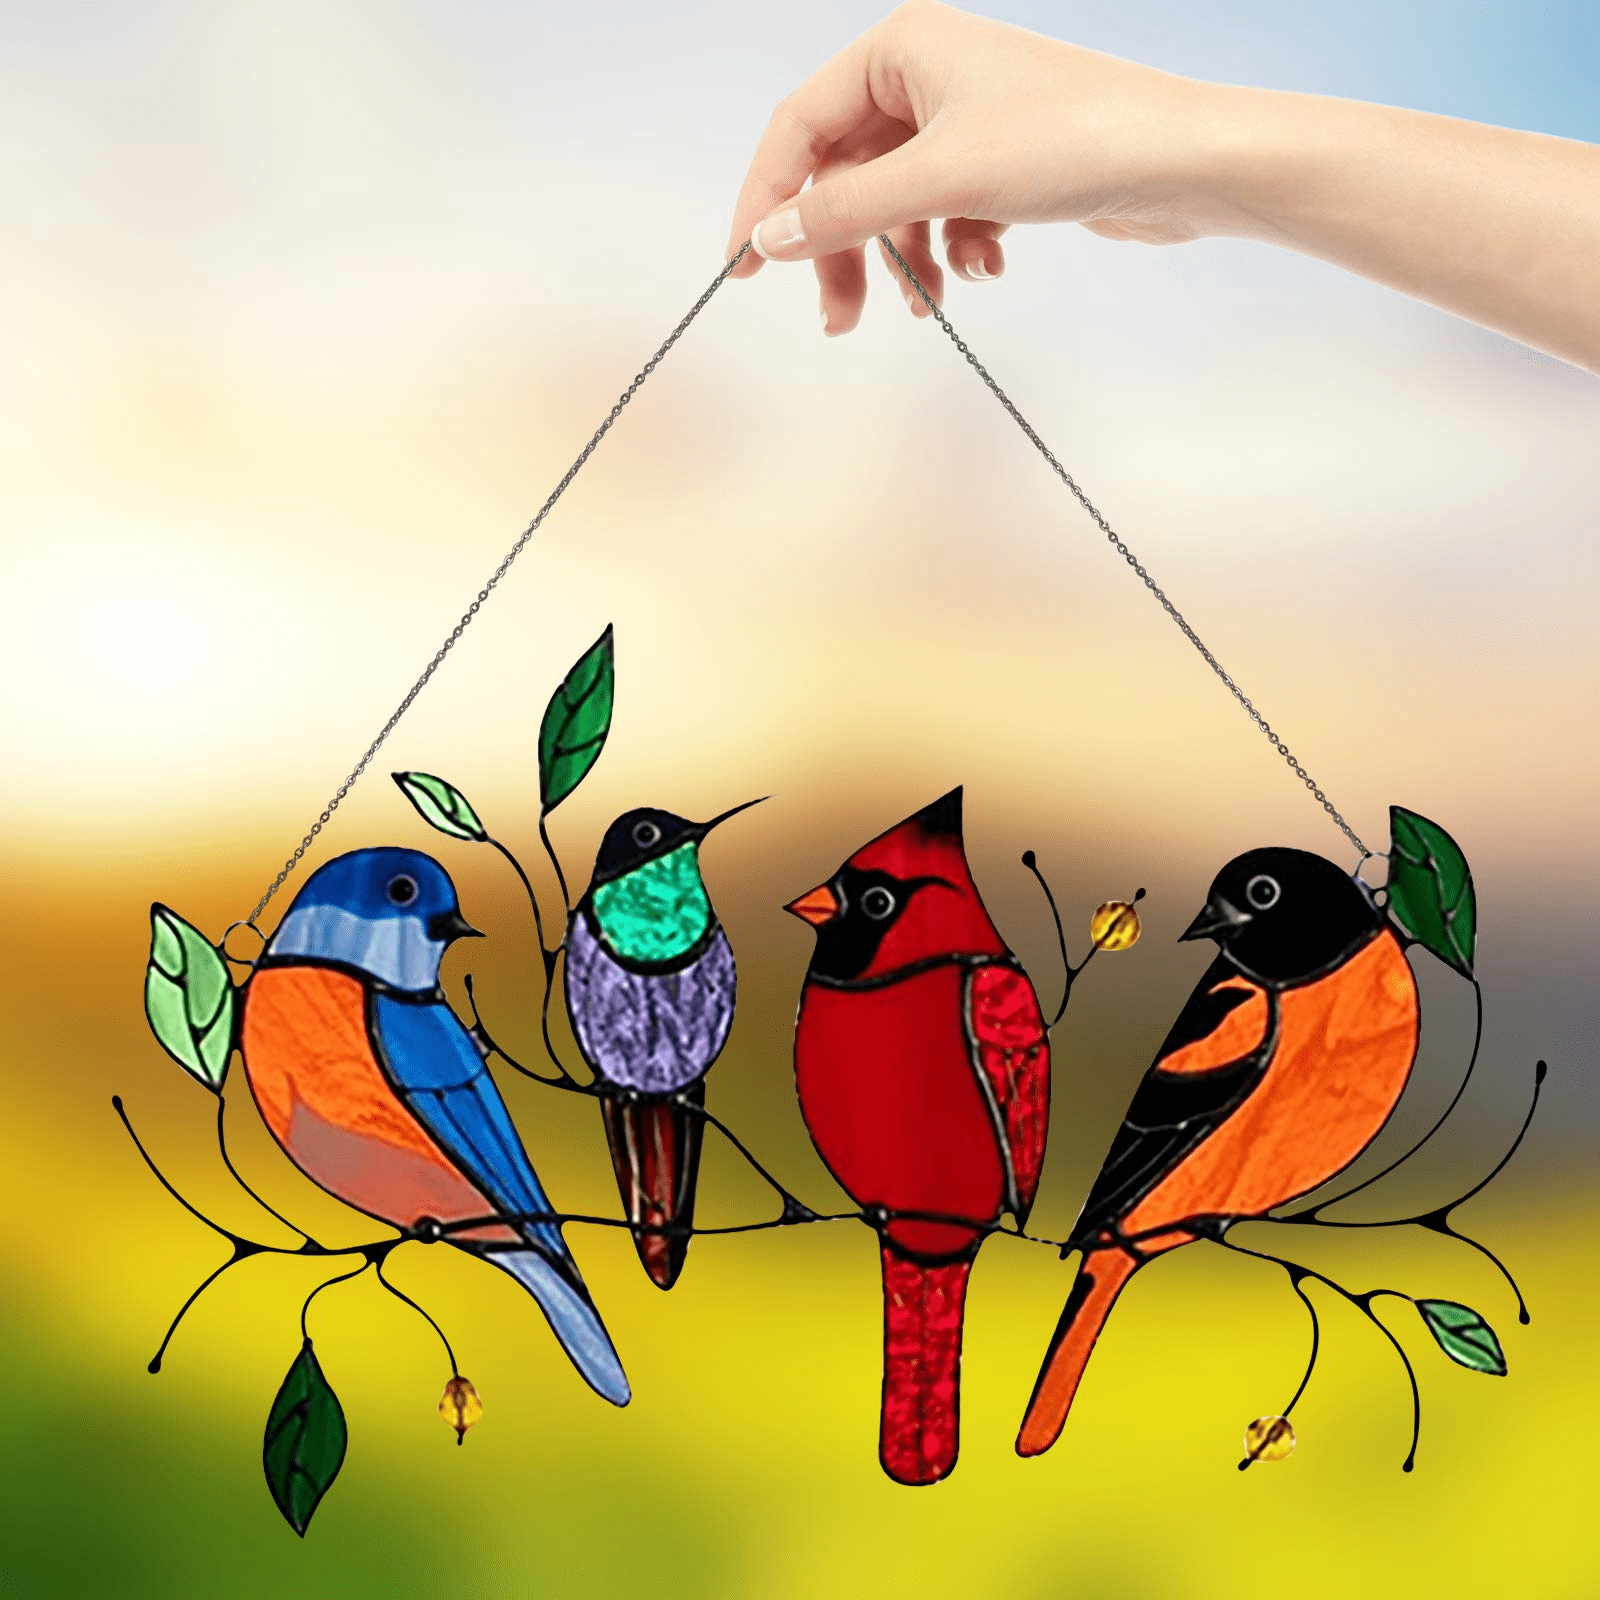 4 Birds Multicolor Birds on a Wire High Stained Ornament Glass Suncatcher Window Panel,Bird Series Hanging Ornaments Pendant Home Decoration,Home Decor Gifts for Bird Lover 